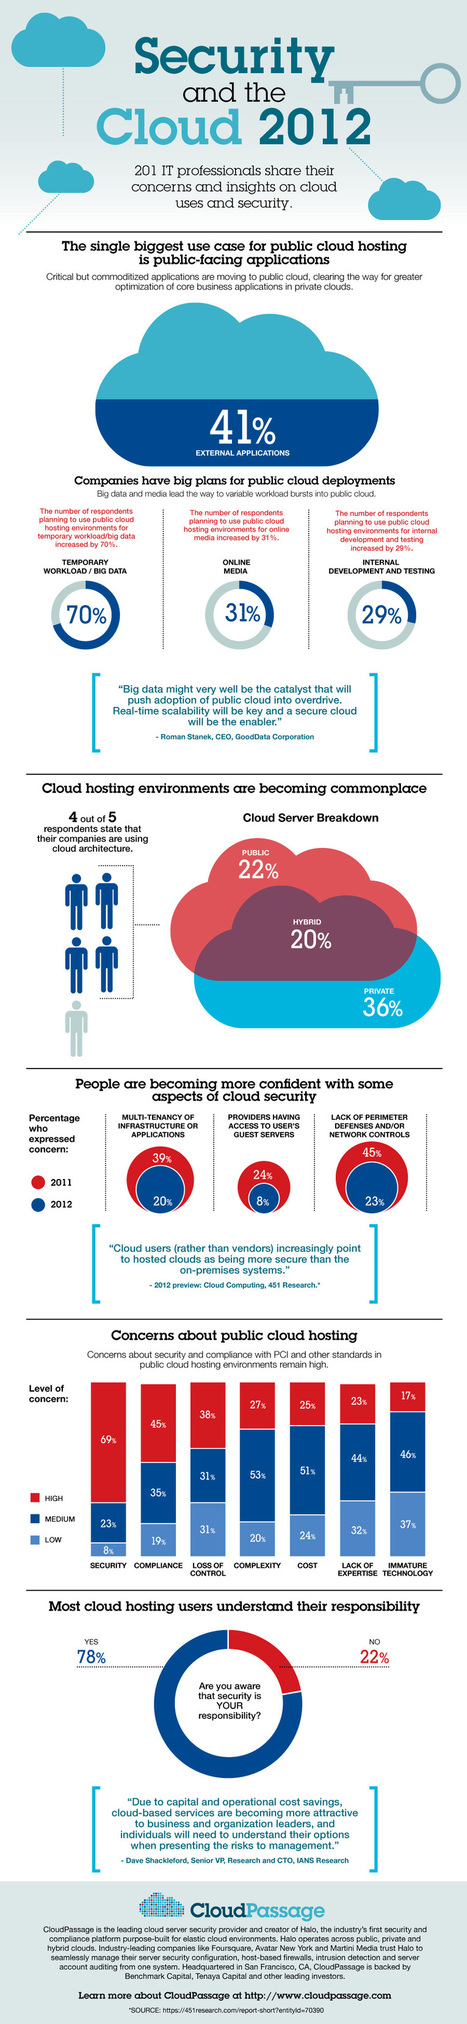 Infographic: Security and the Cloud 2012 | business analyst | Scoop.it